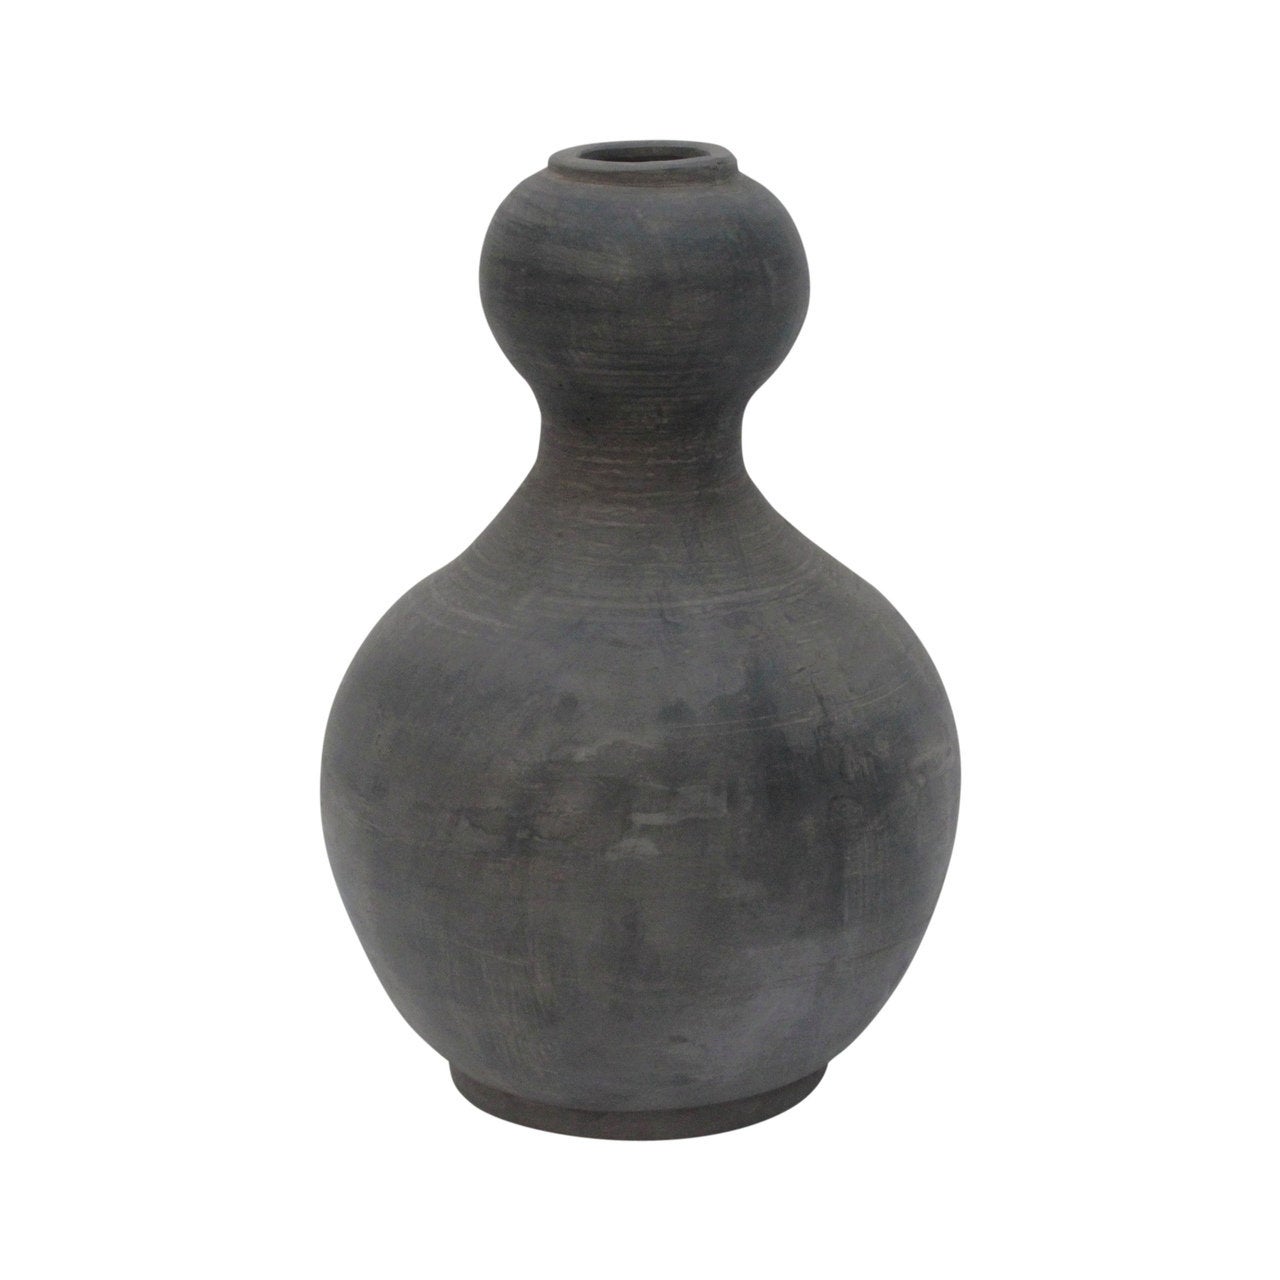 Earthy Grey Pottery Gourd-shaped Vase Hand made (finish vary no two are the same).